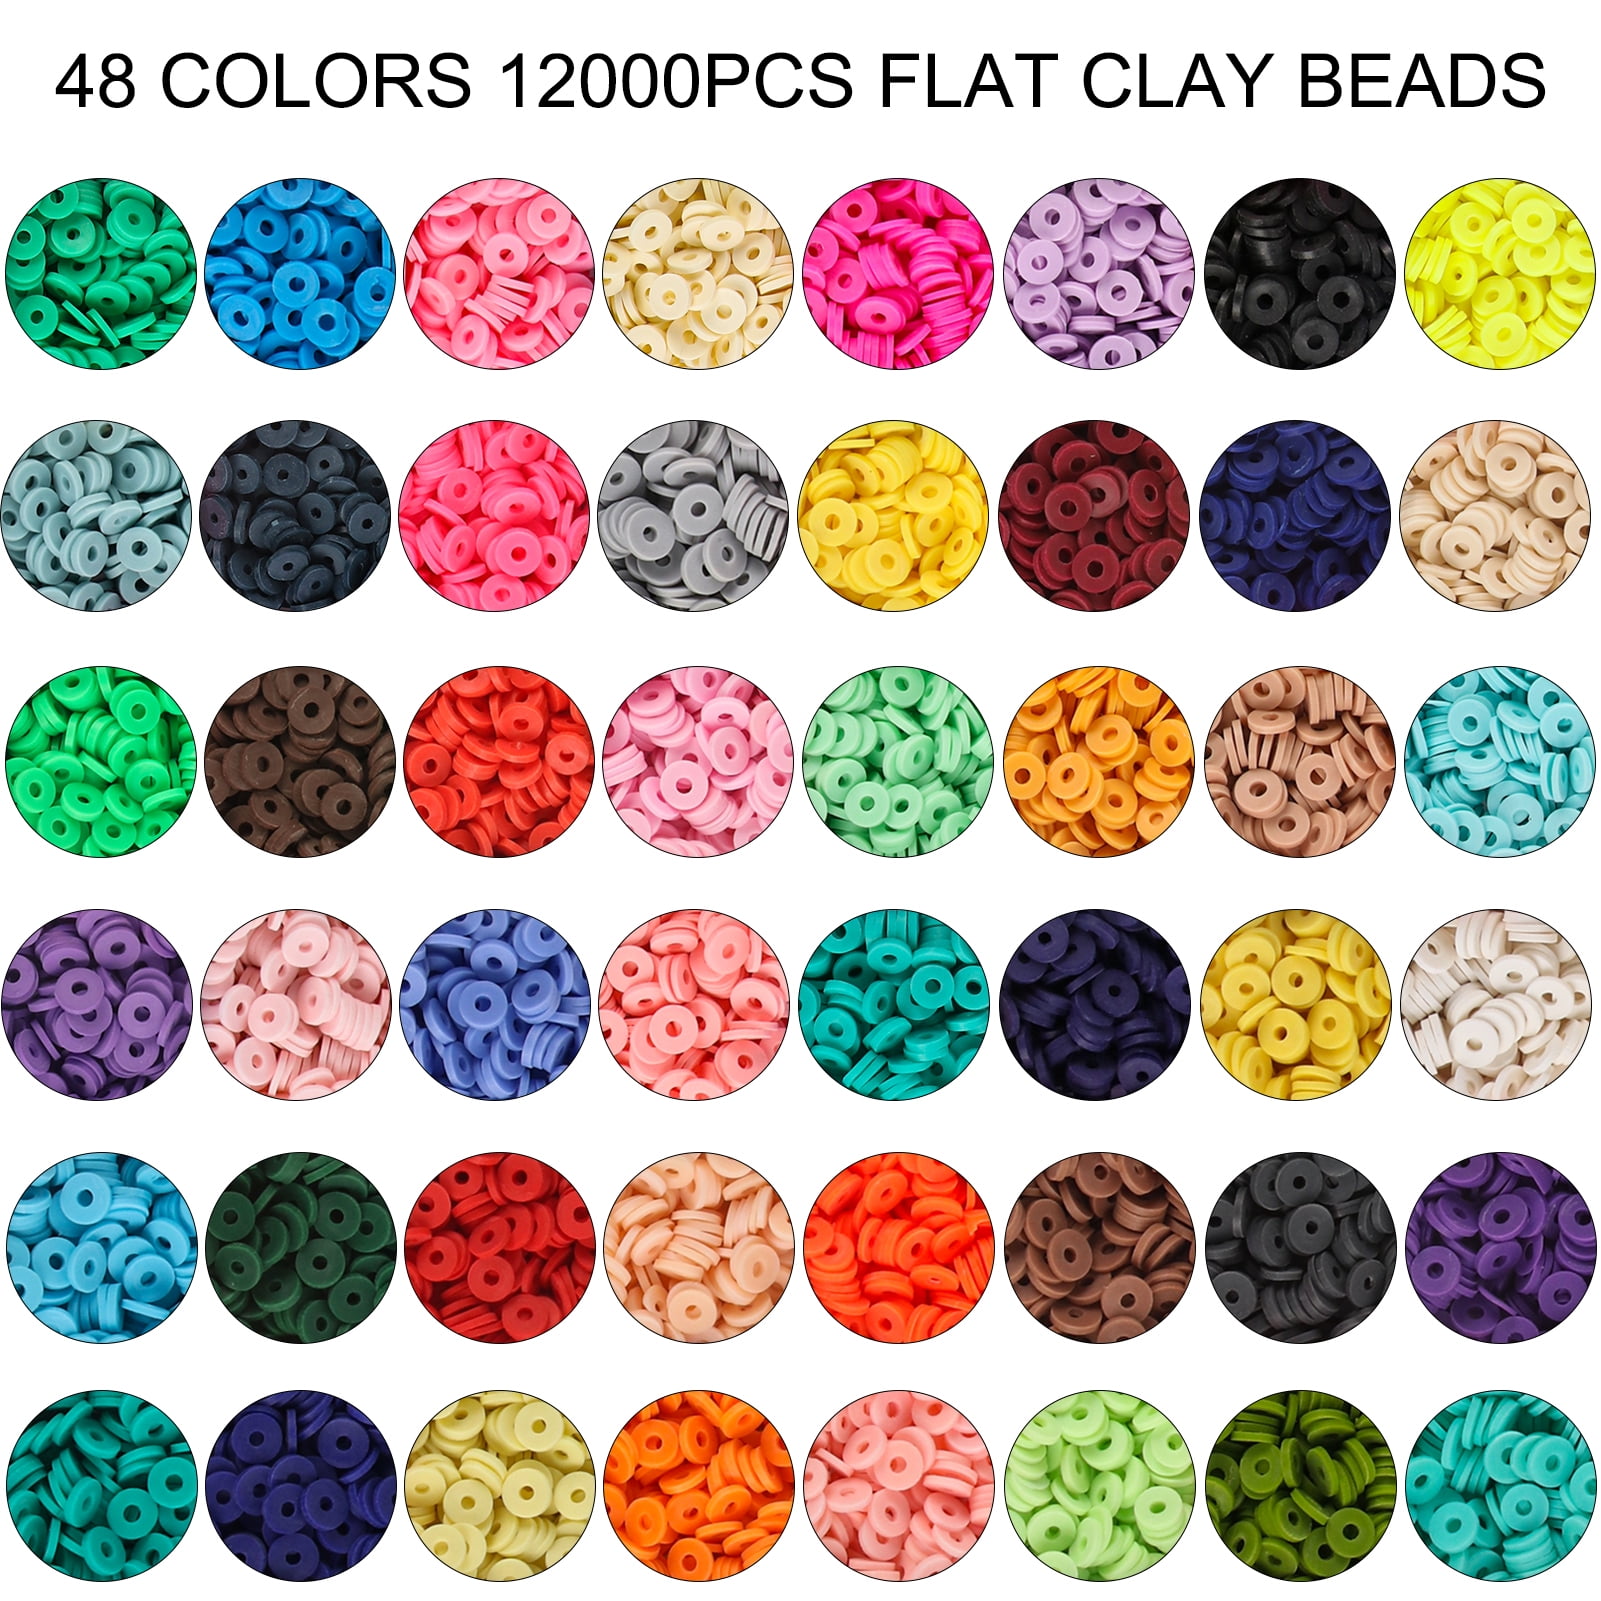 Koralakiri 12000Pcs Flat Polymer Clay Beads Kit 48 Colors,6mm Heishi Beads  for Bracelets Necklaces Jewelry Making Gifts for Girls Ages 6-12 